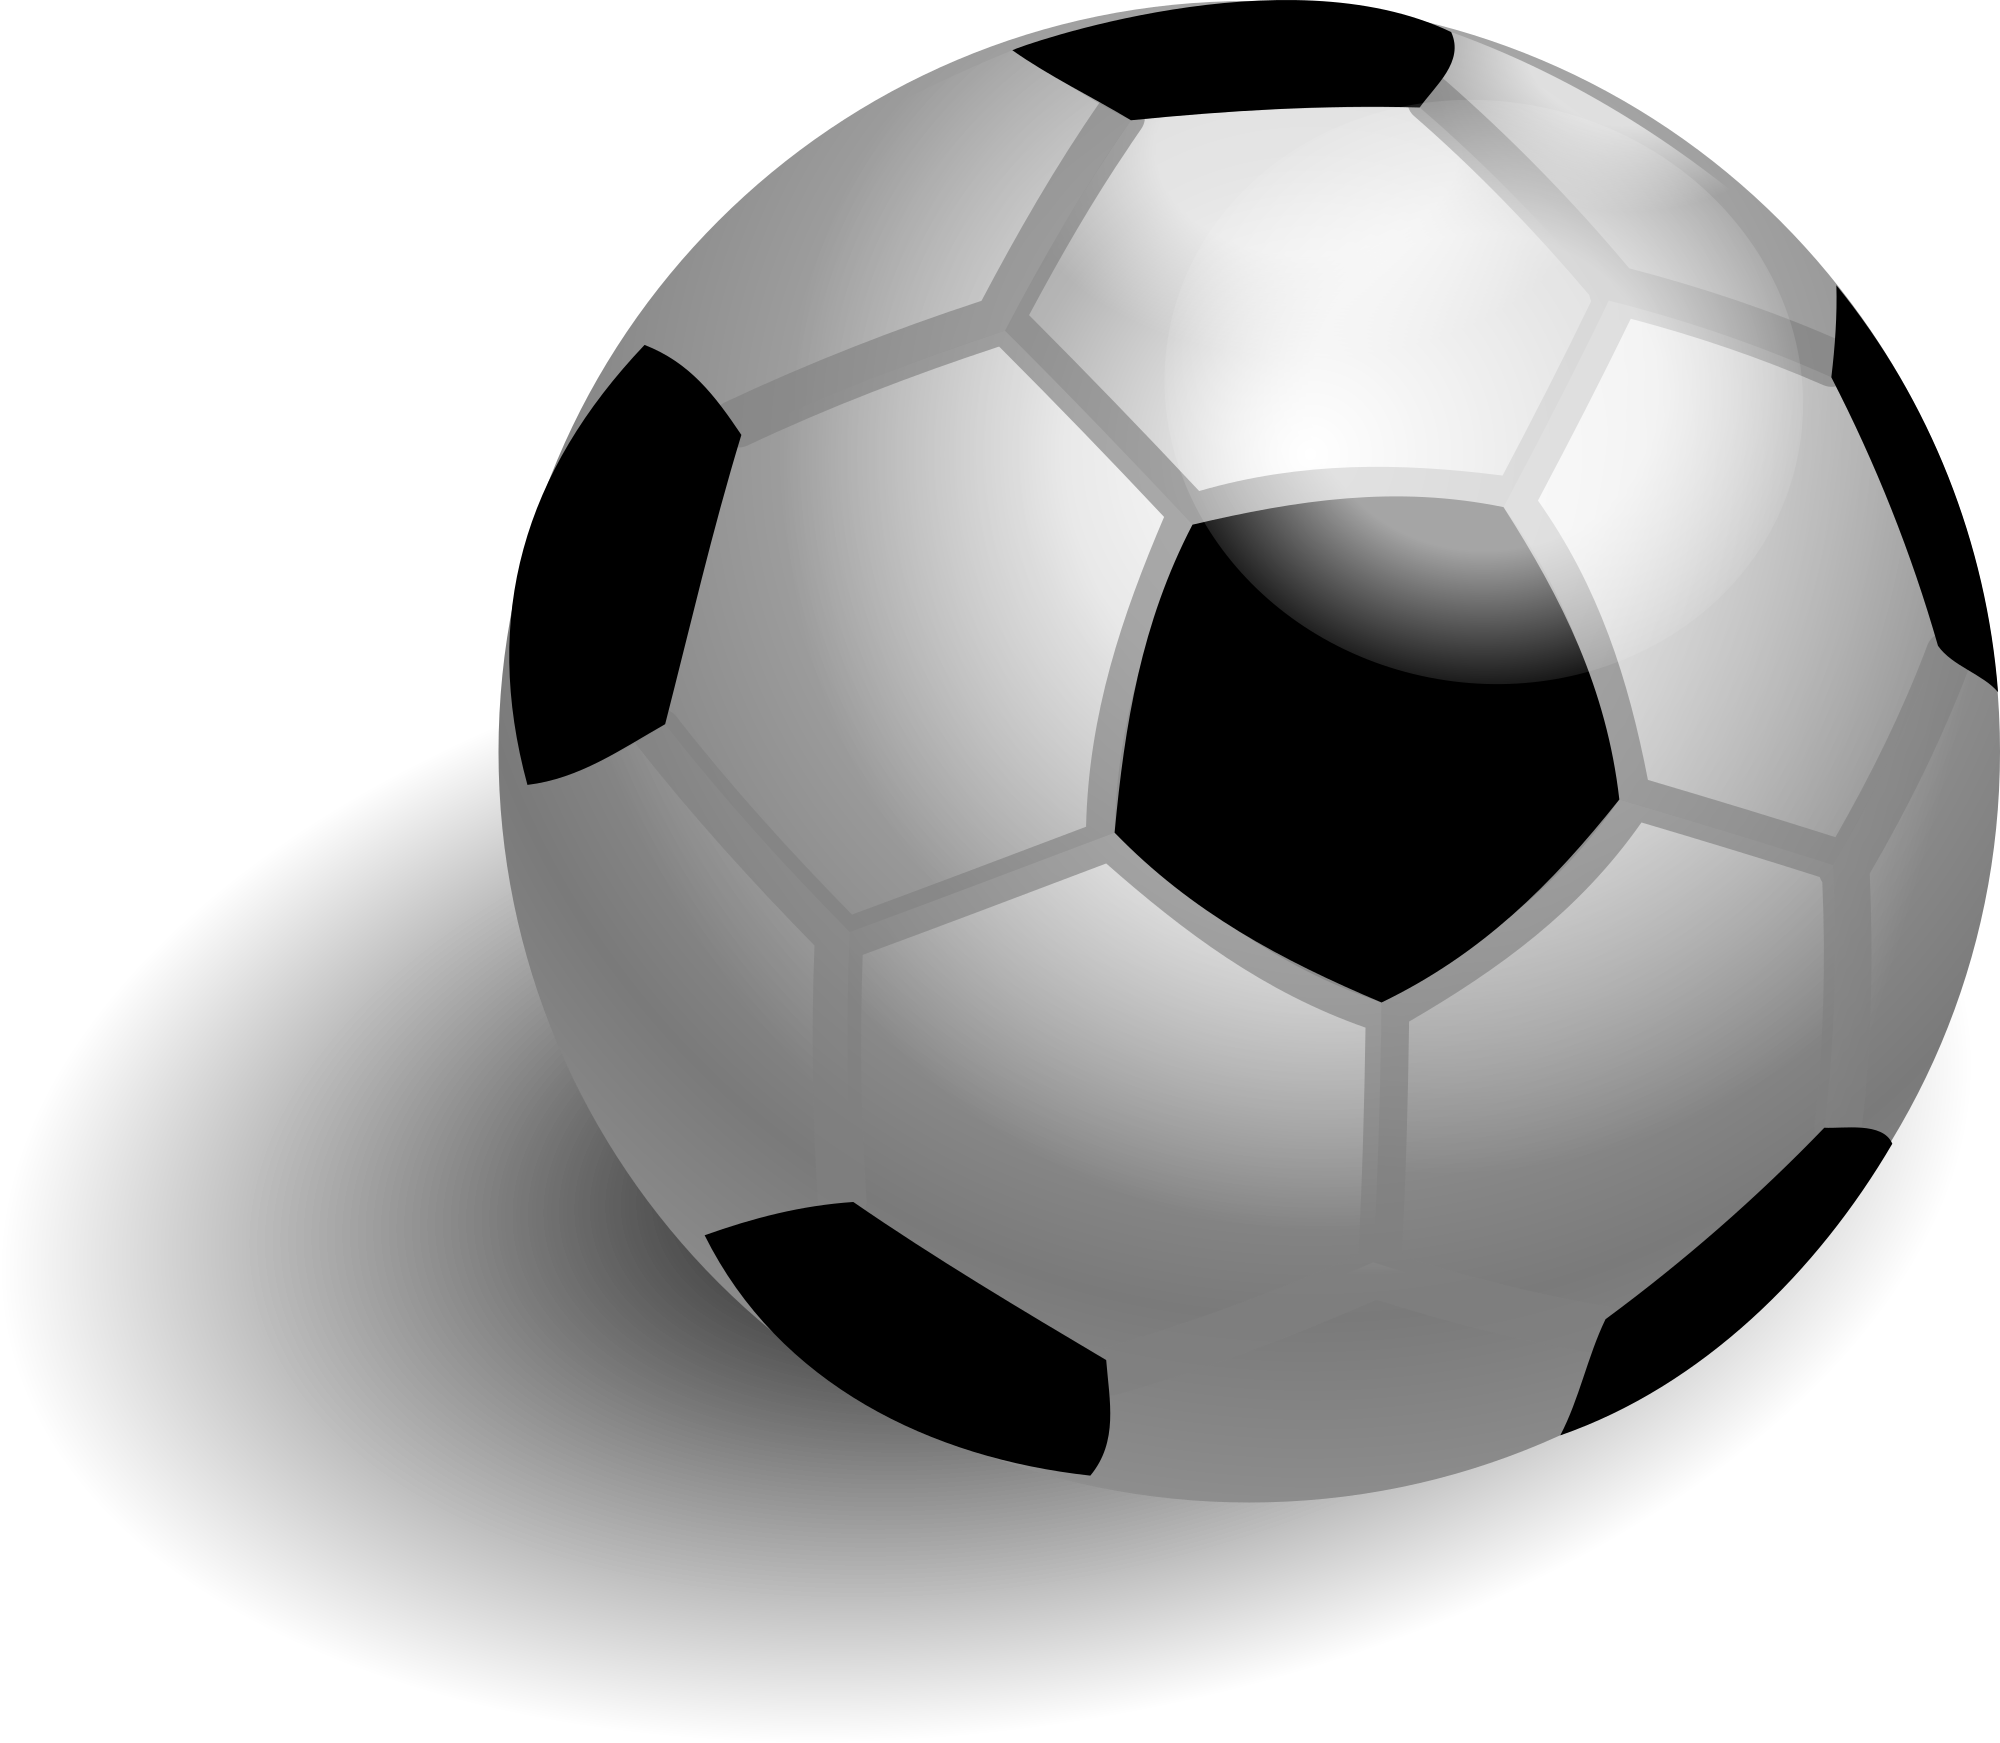 Free soccer ball with shadow clipart clipart and vector image 2